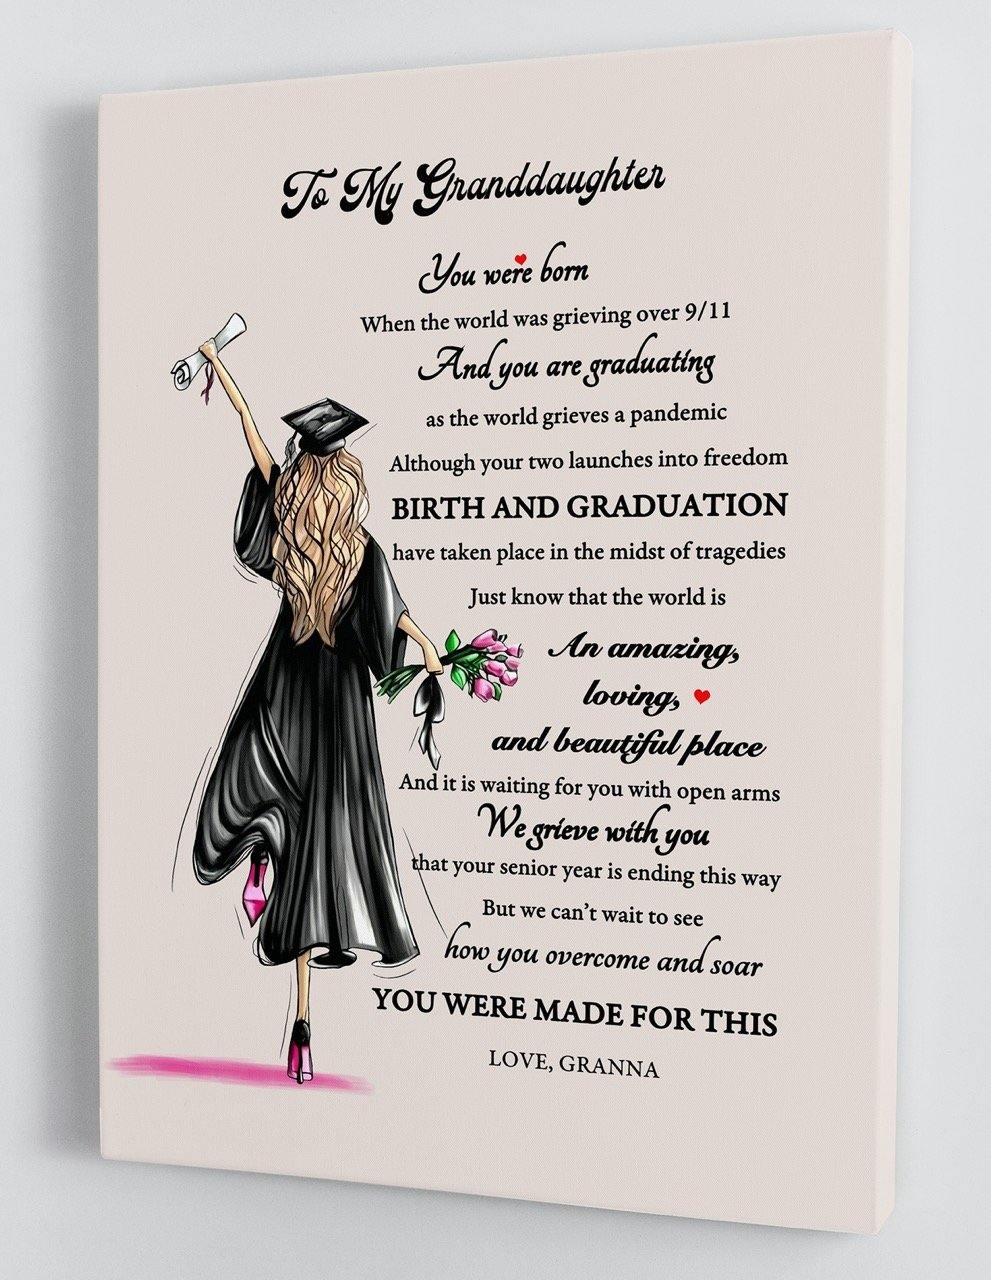 To My Granddaughter Senior 2021 - From Granna - Graduation Framed Canvas Gift GMD017 - DivesArt LLC